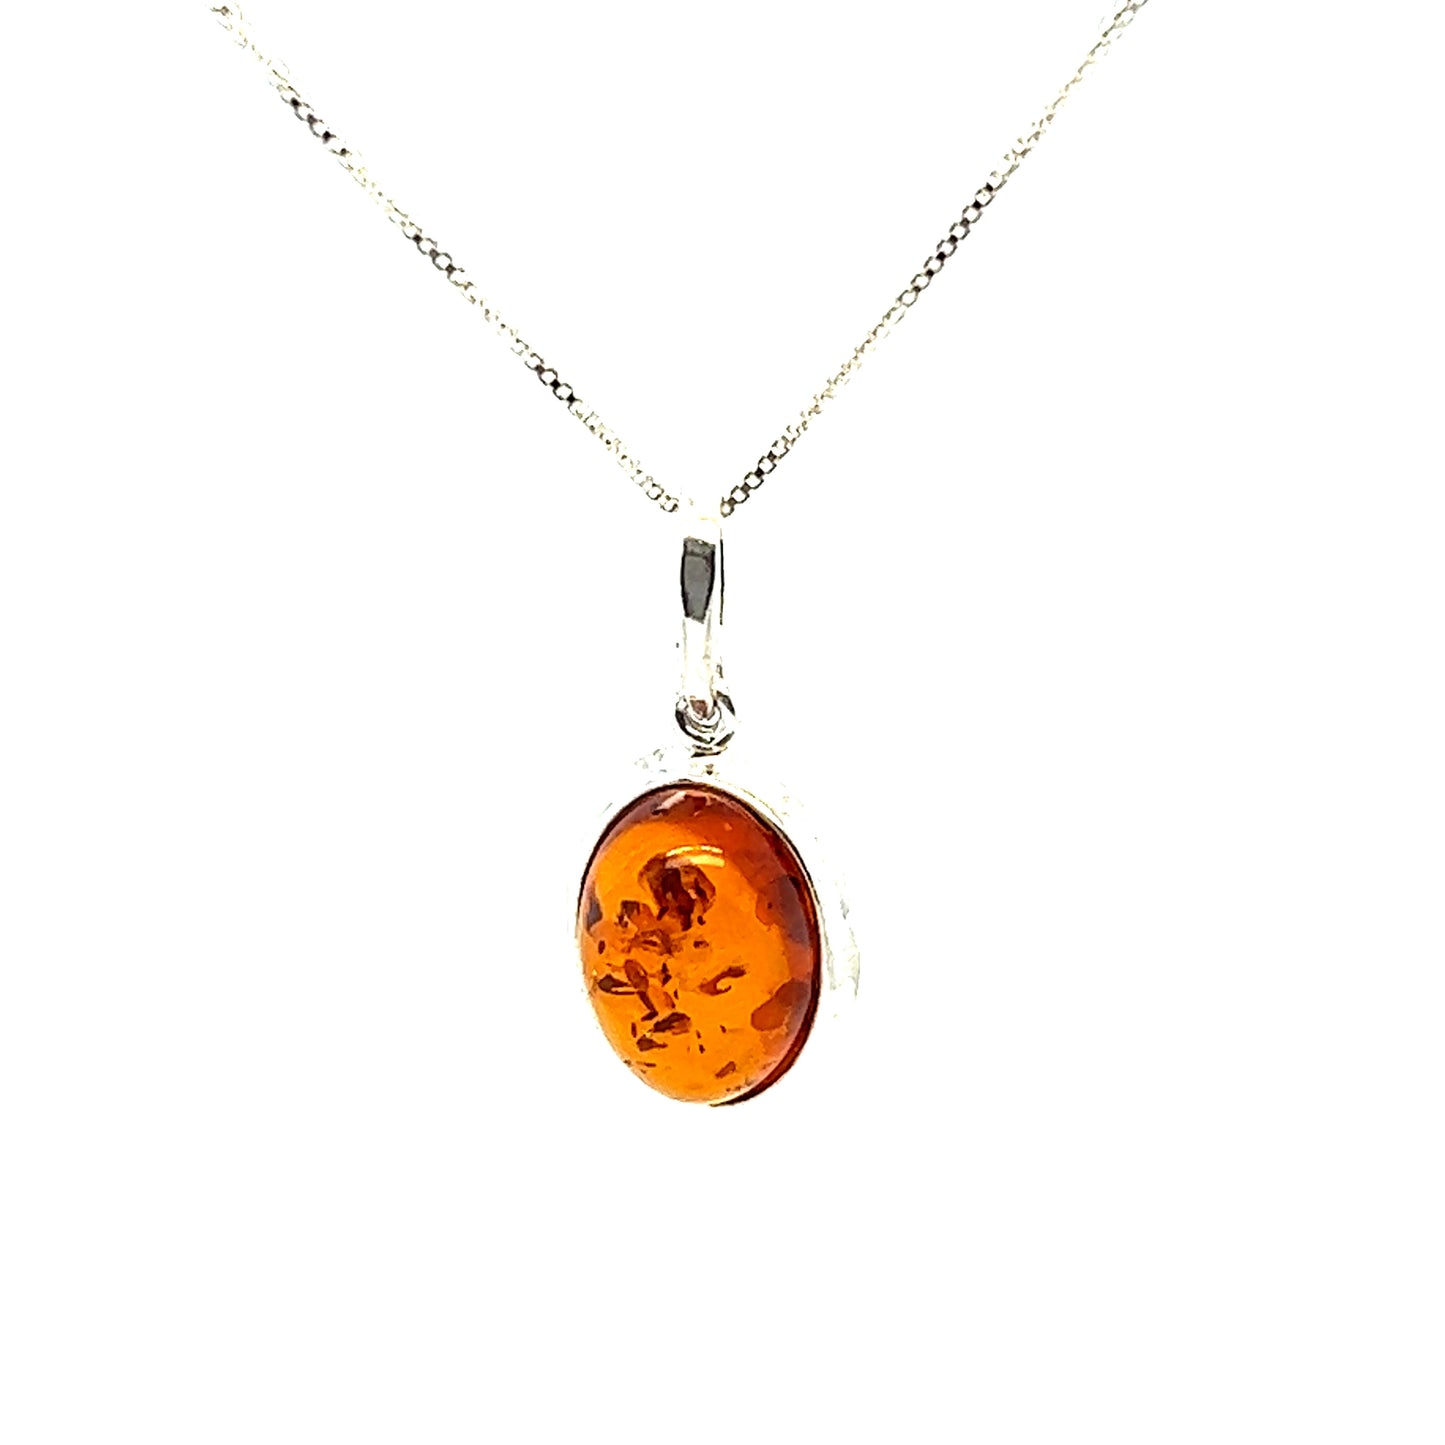 A necklace with a Simple Framed Oval Amber Pendant on a Super Silver sterling silver chain.